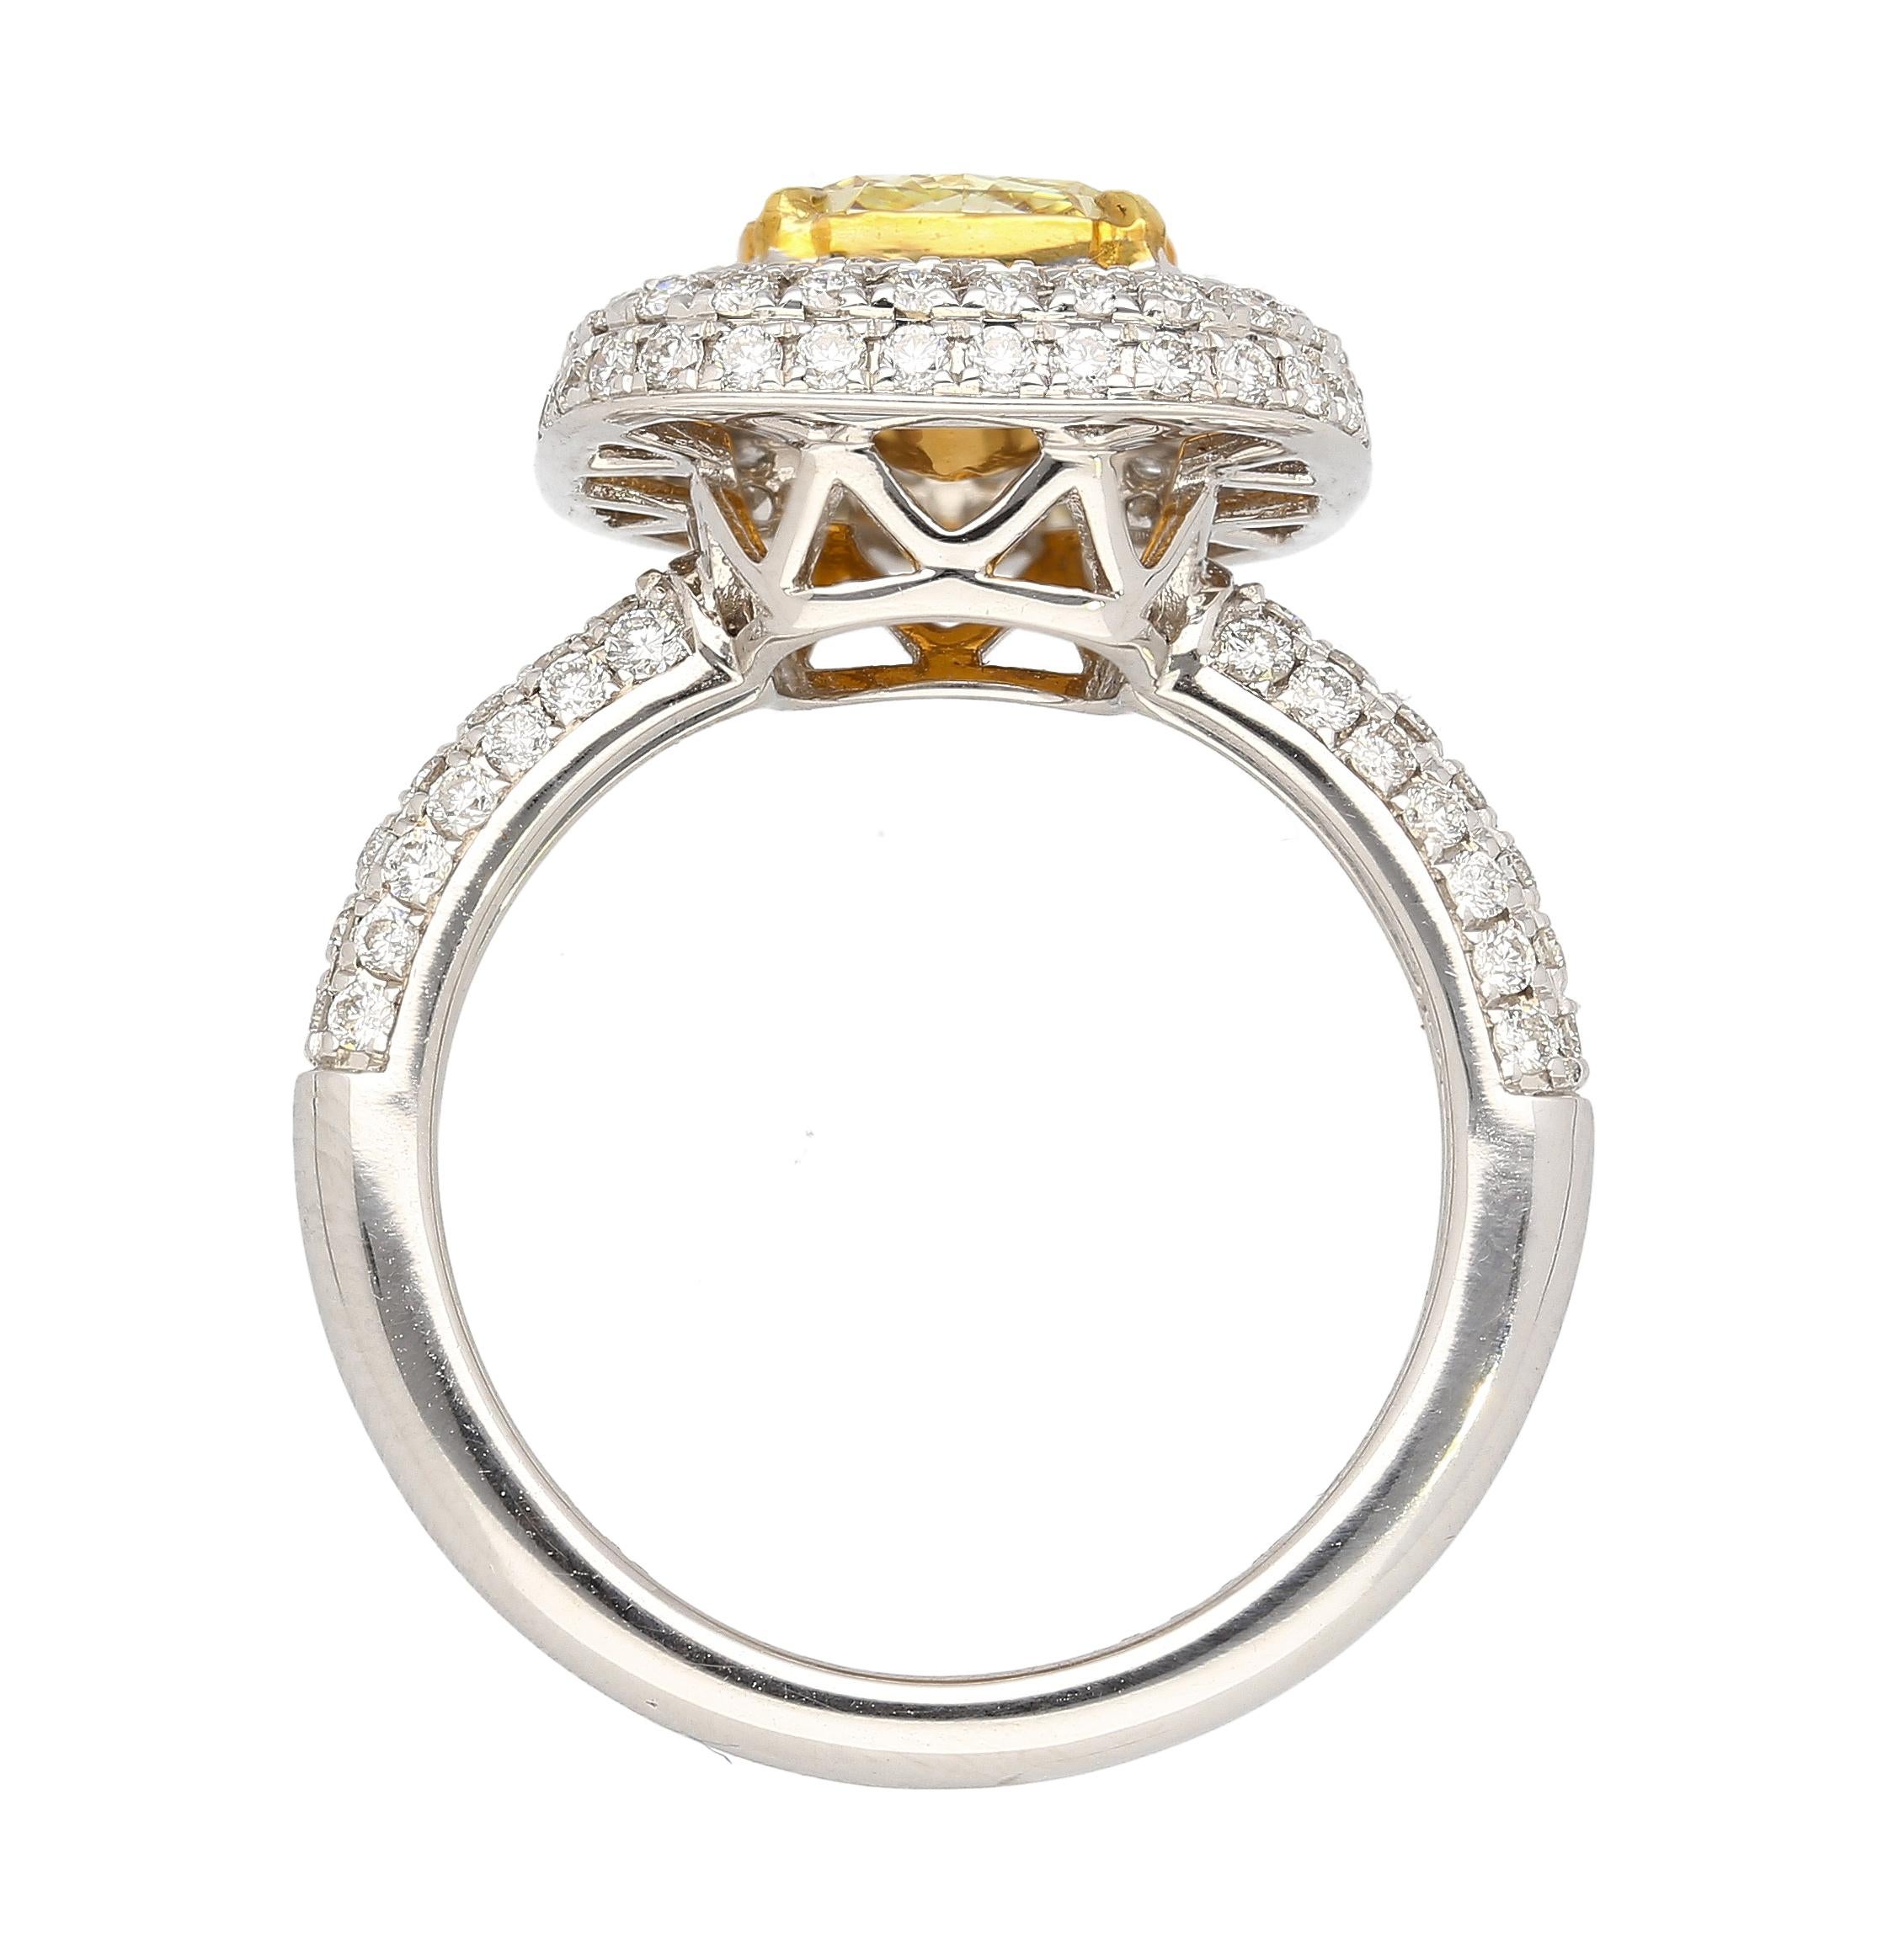 GIA Certified 2.35 Radiant Cut Fancy Yellow Diamond Ring in 18k White Gold For Sale 1